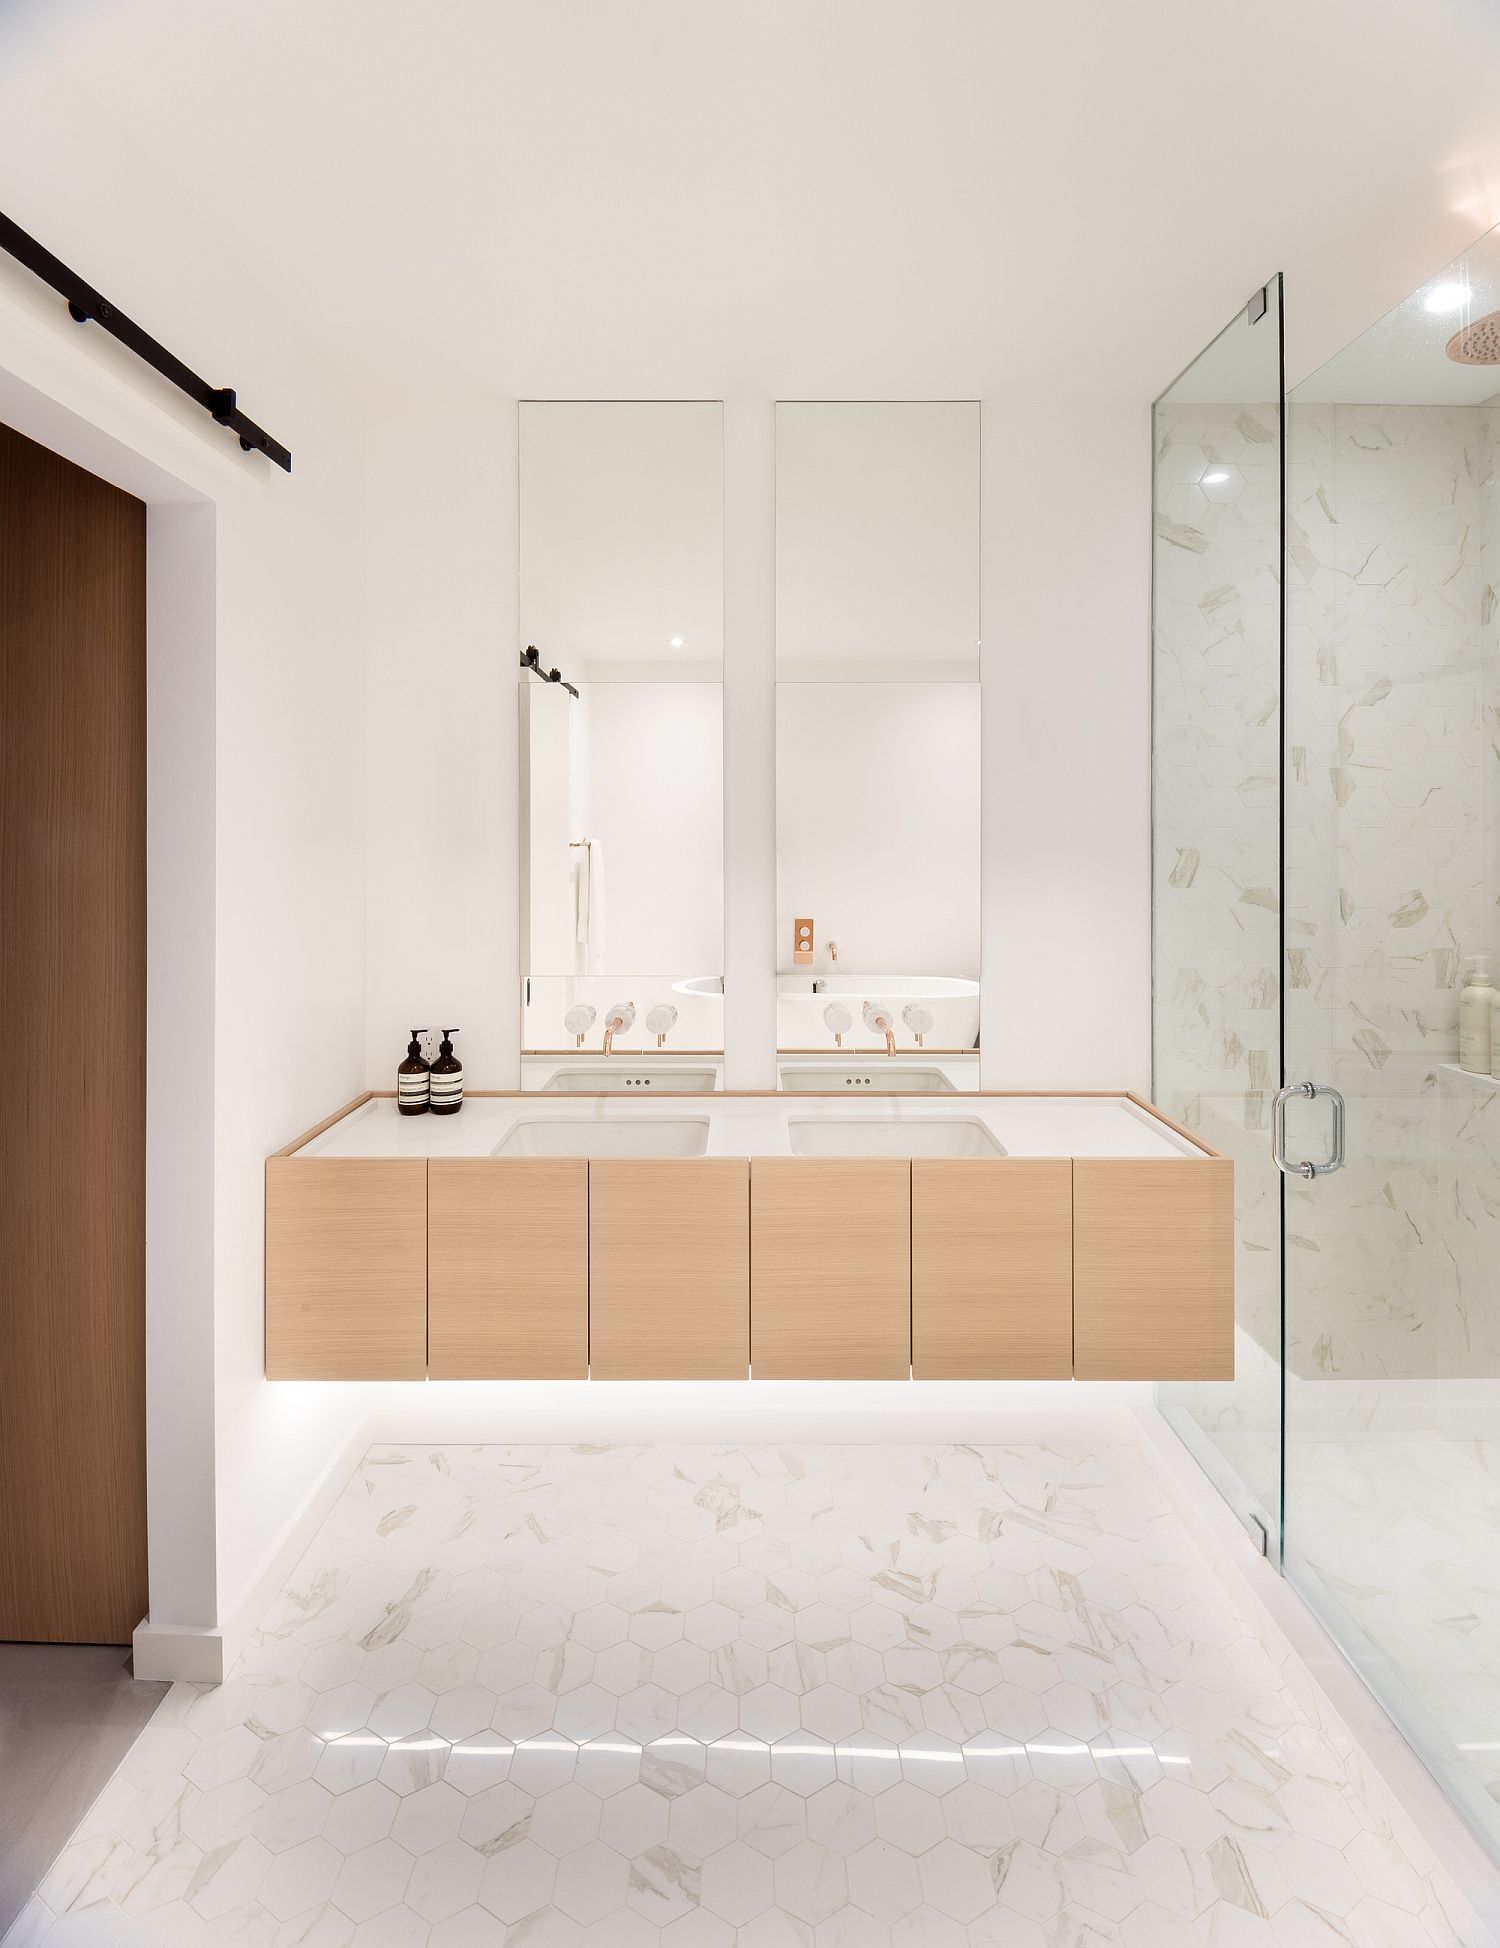 White hexagonal tiles on the floor add subtle pattern to the curated bathroom